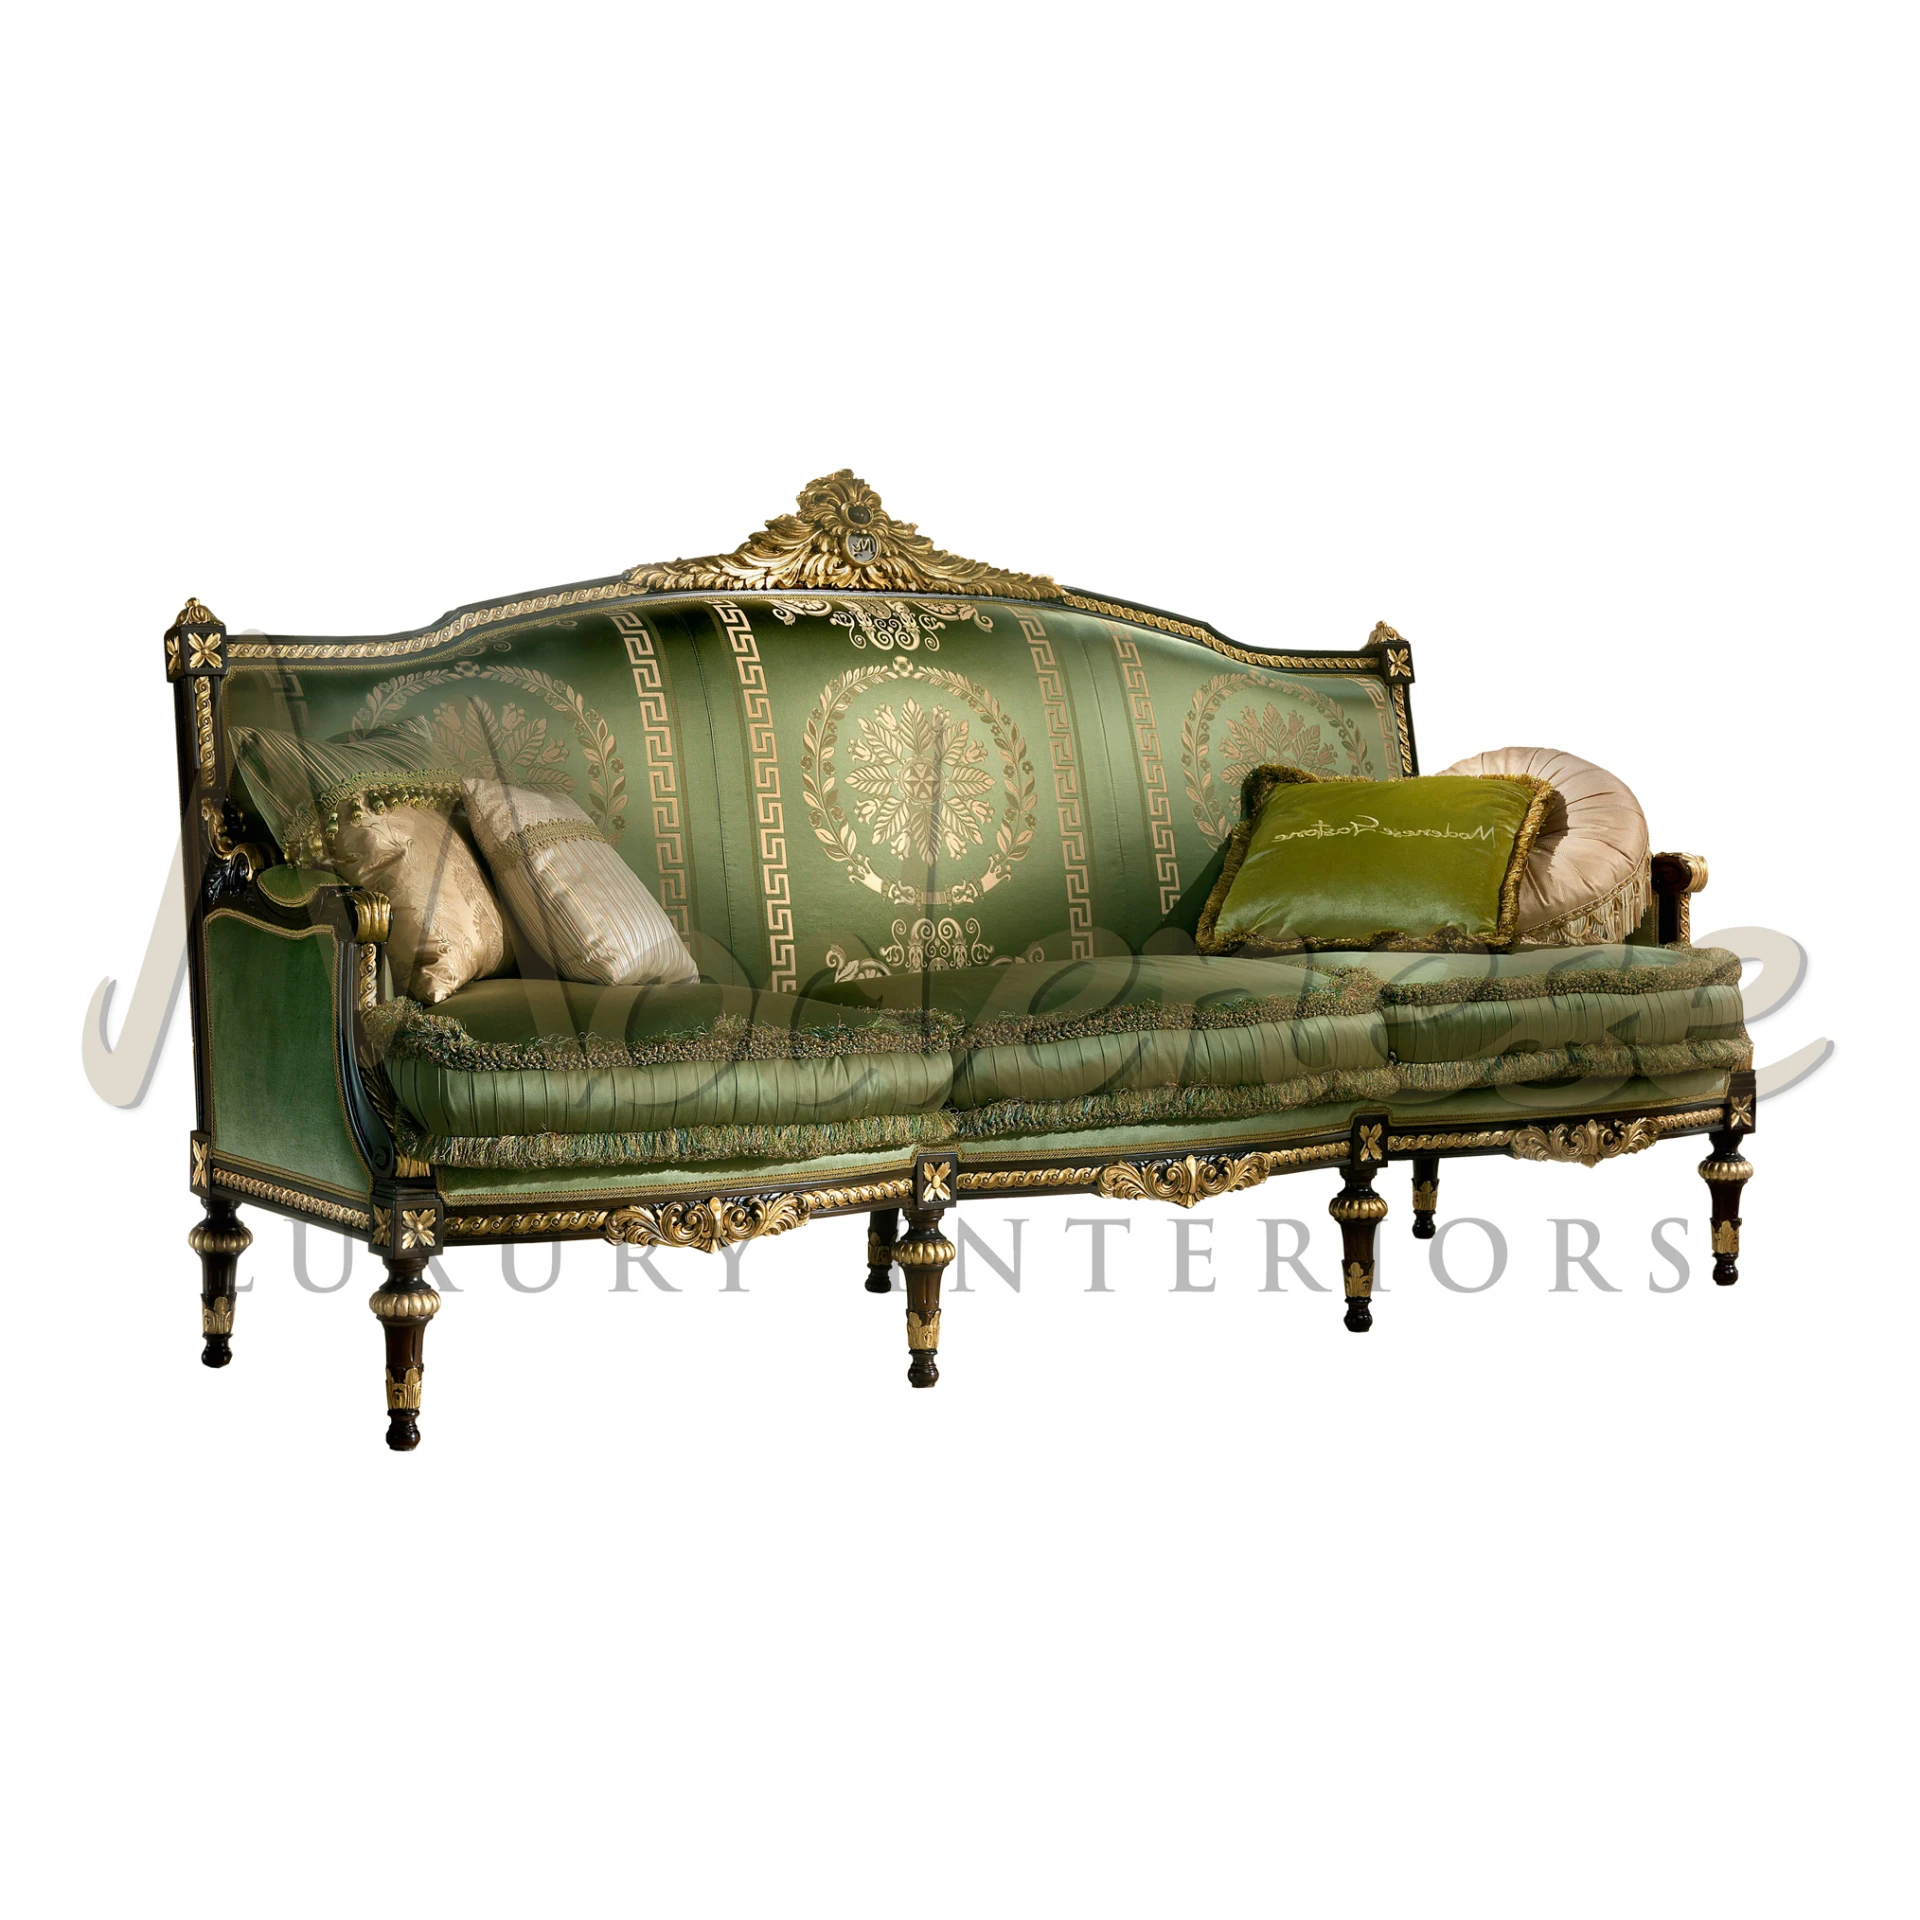 Vintage-Inspired Green Victorian Sofa with Damask Upholstery